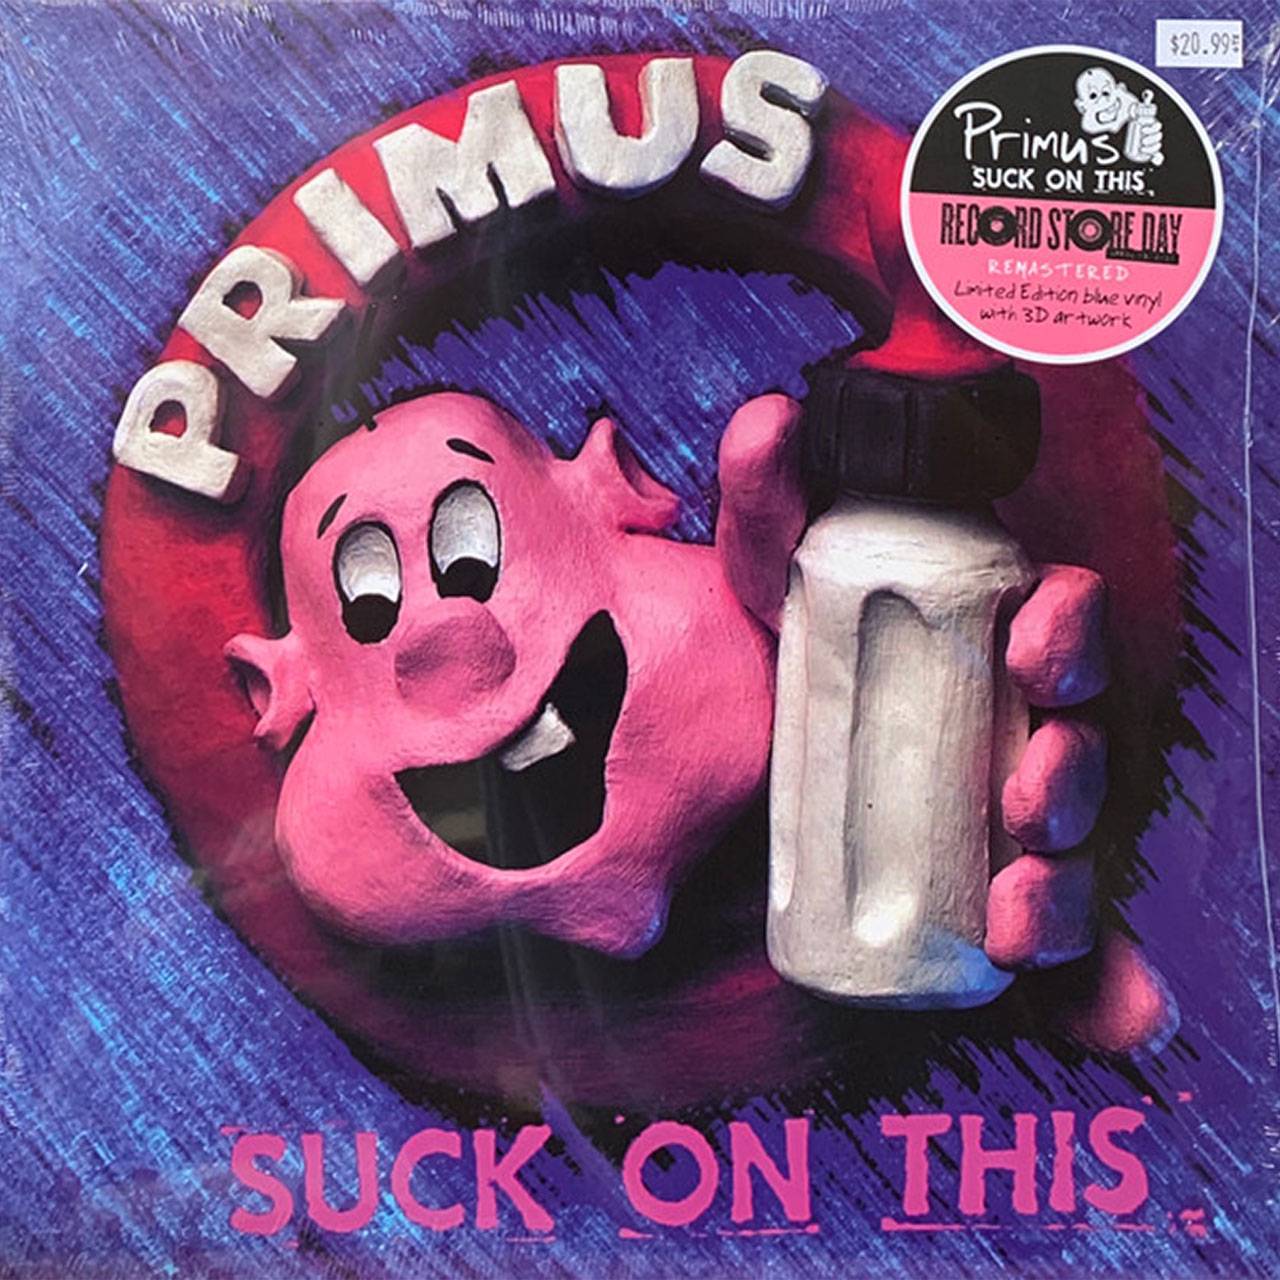 Primus - Suck On This (RSD 3D Cover)